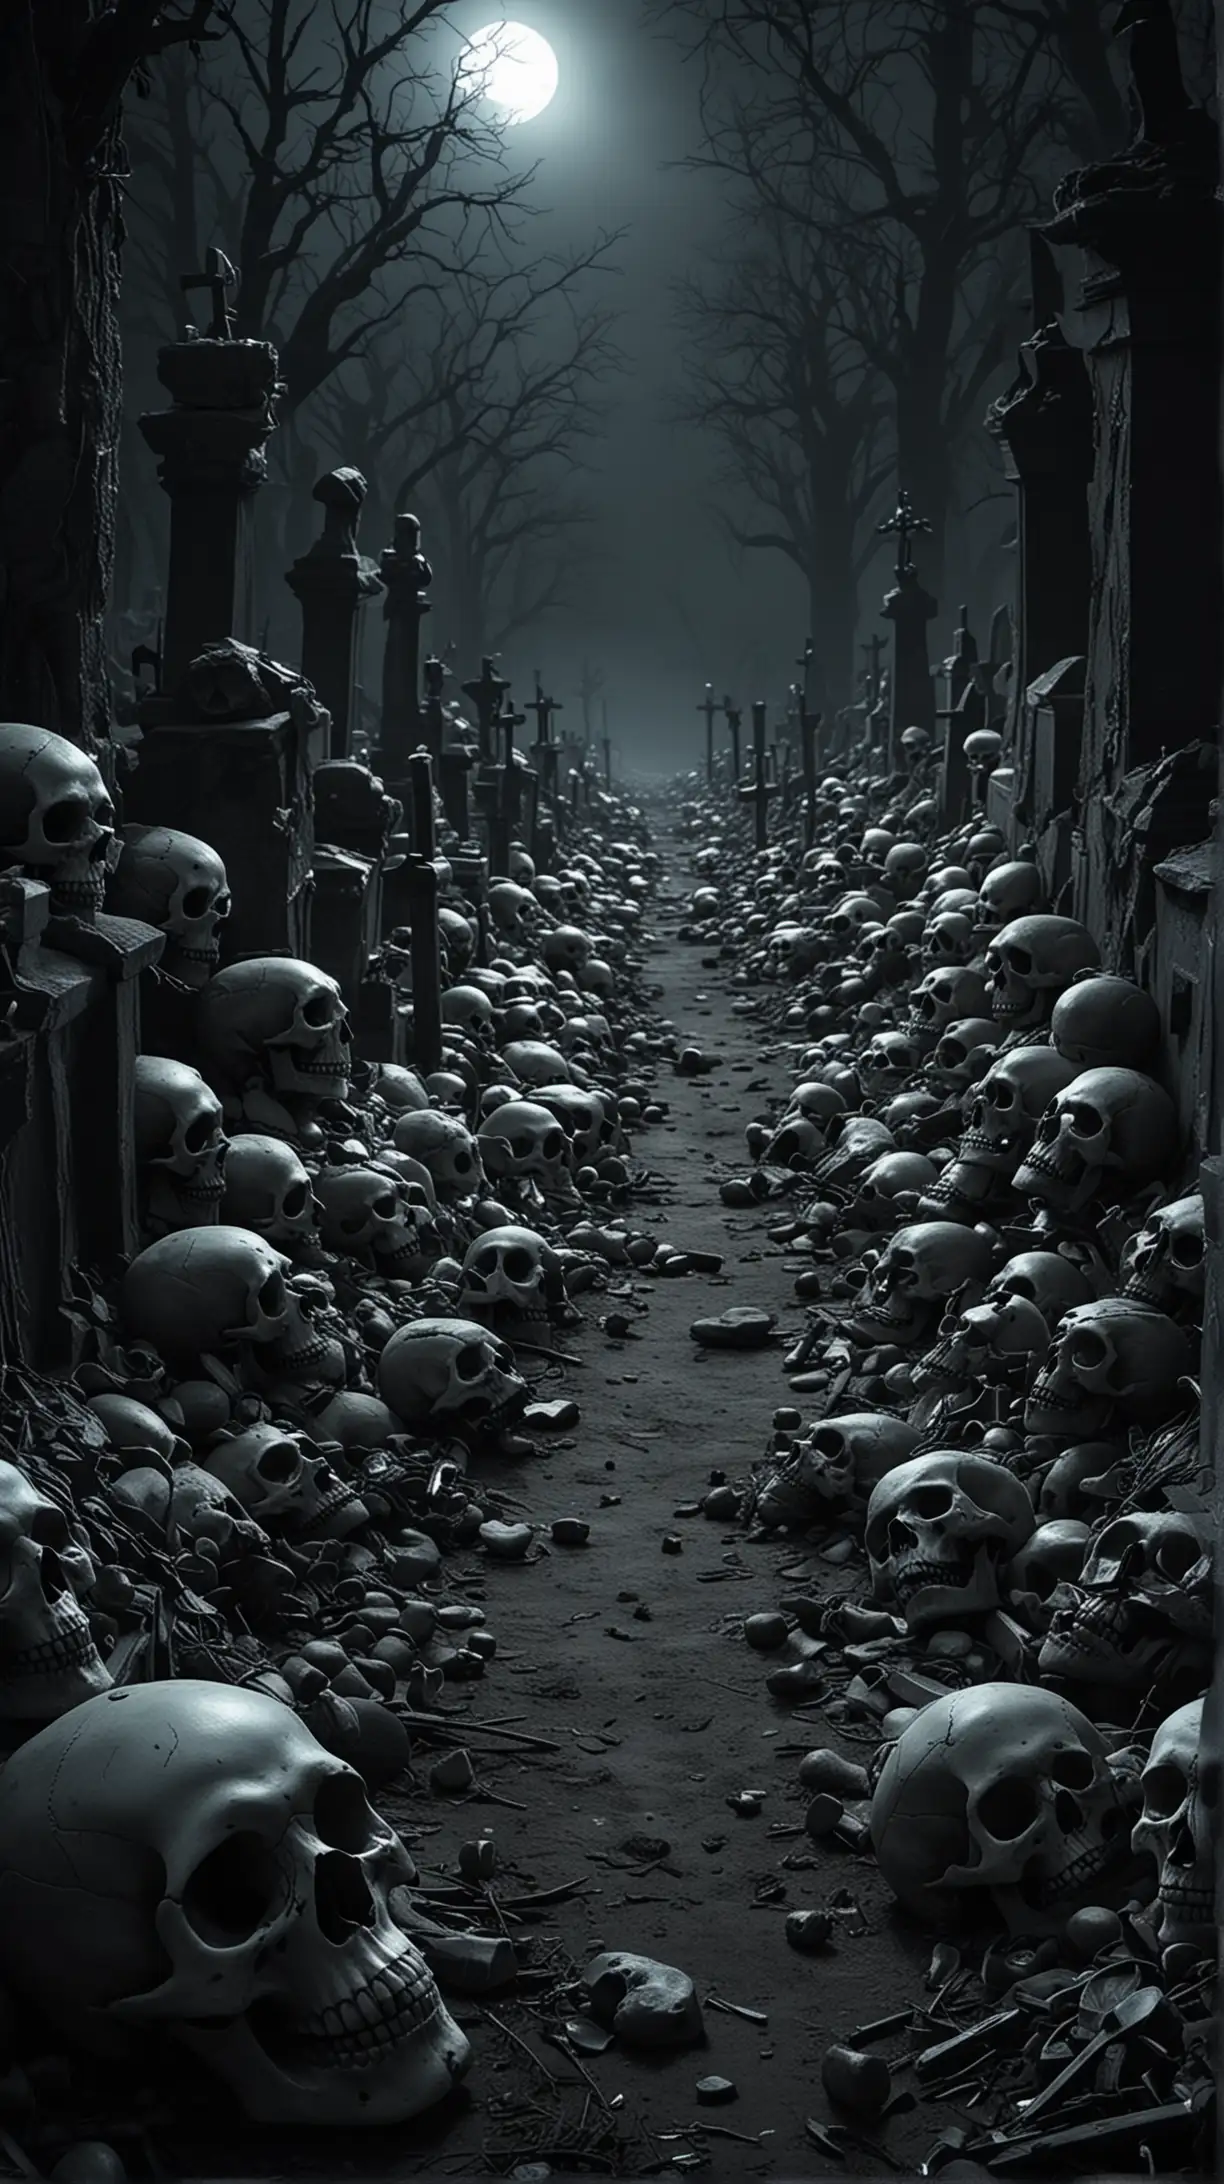 Eerie Skull Cemetery Haunting and Mysterious 4K Background